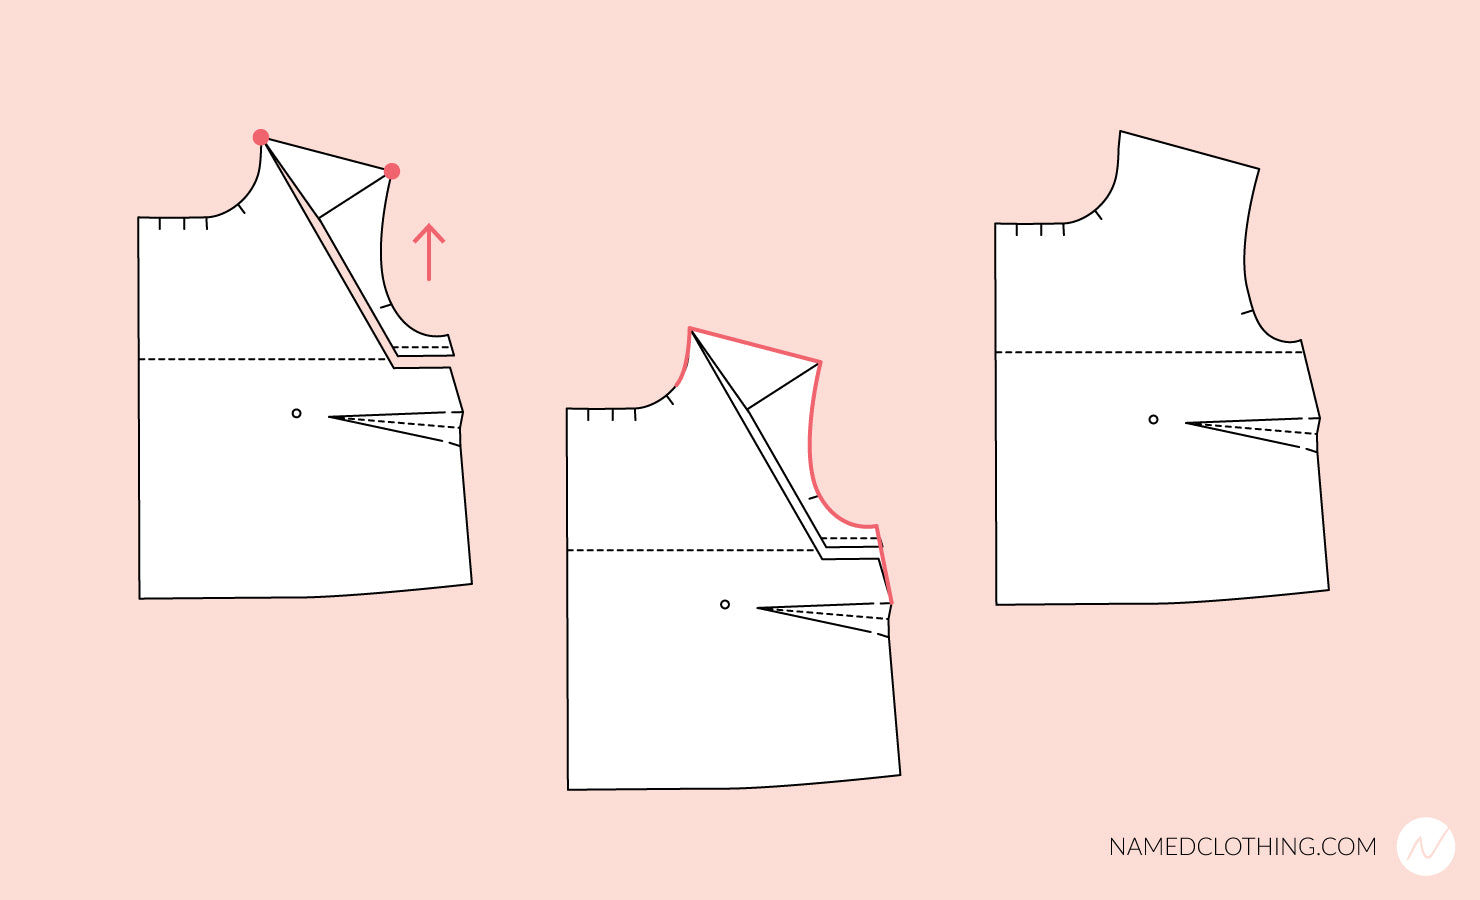 Pattern Alterations | Named Clothing